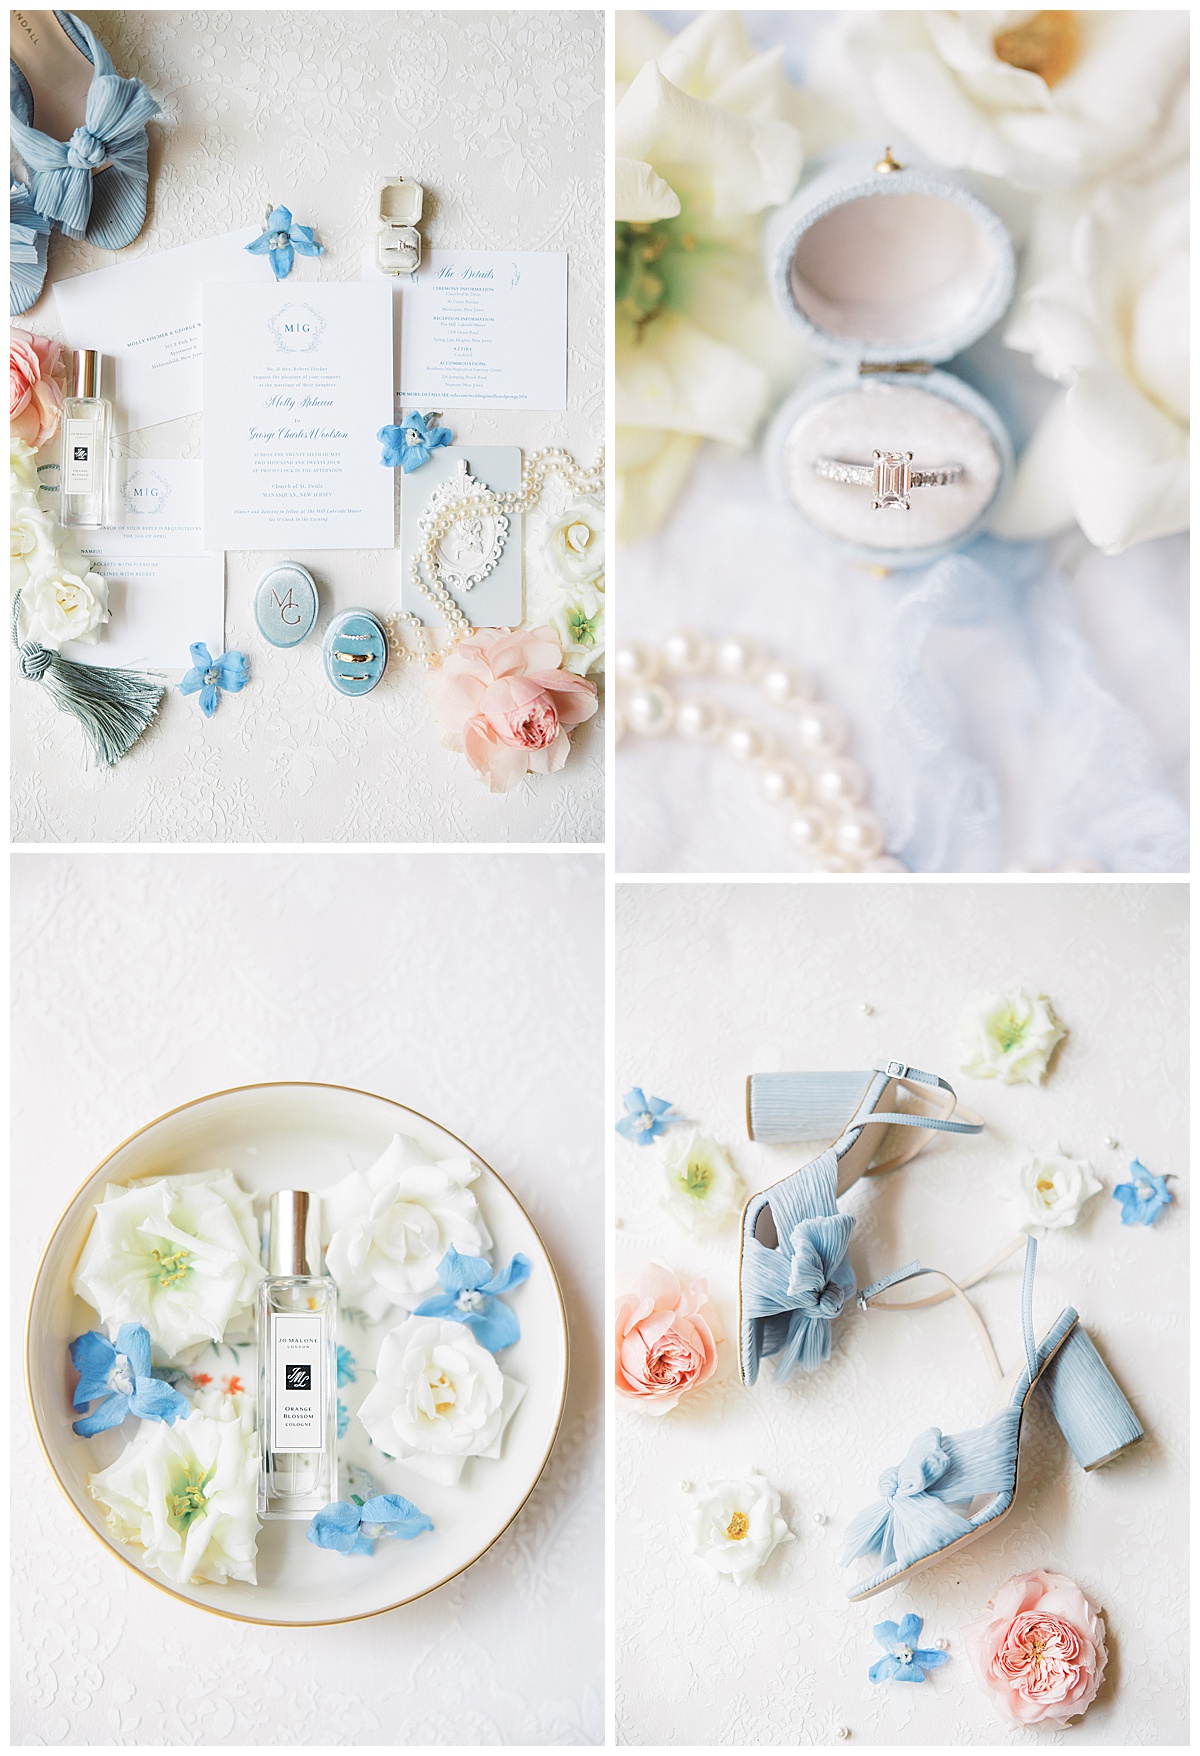 Bridal Details with Blue Shoes with bow + blue ring box.